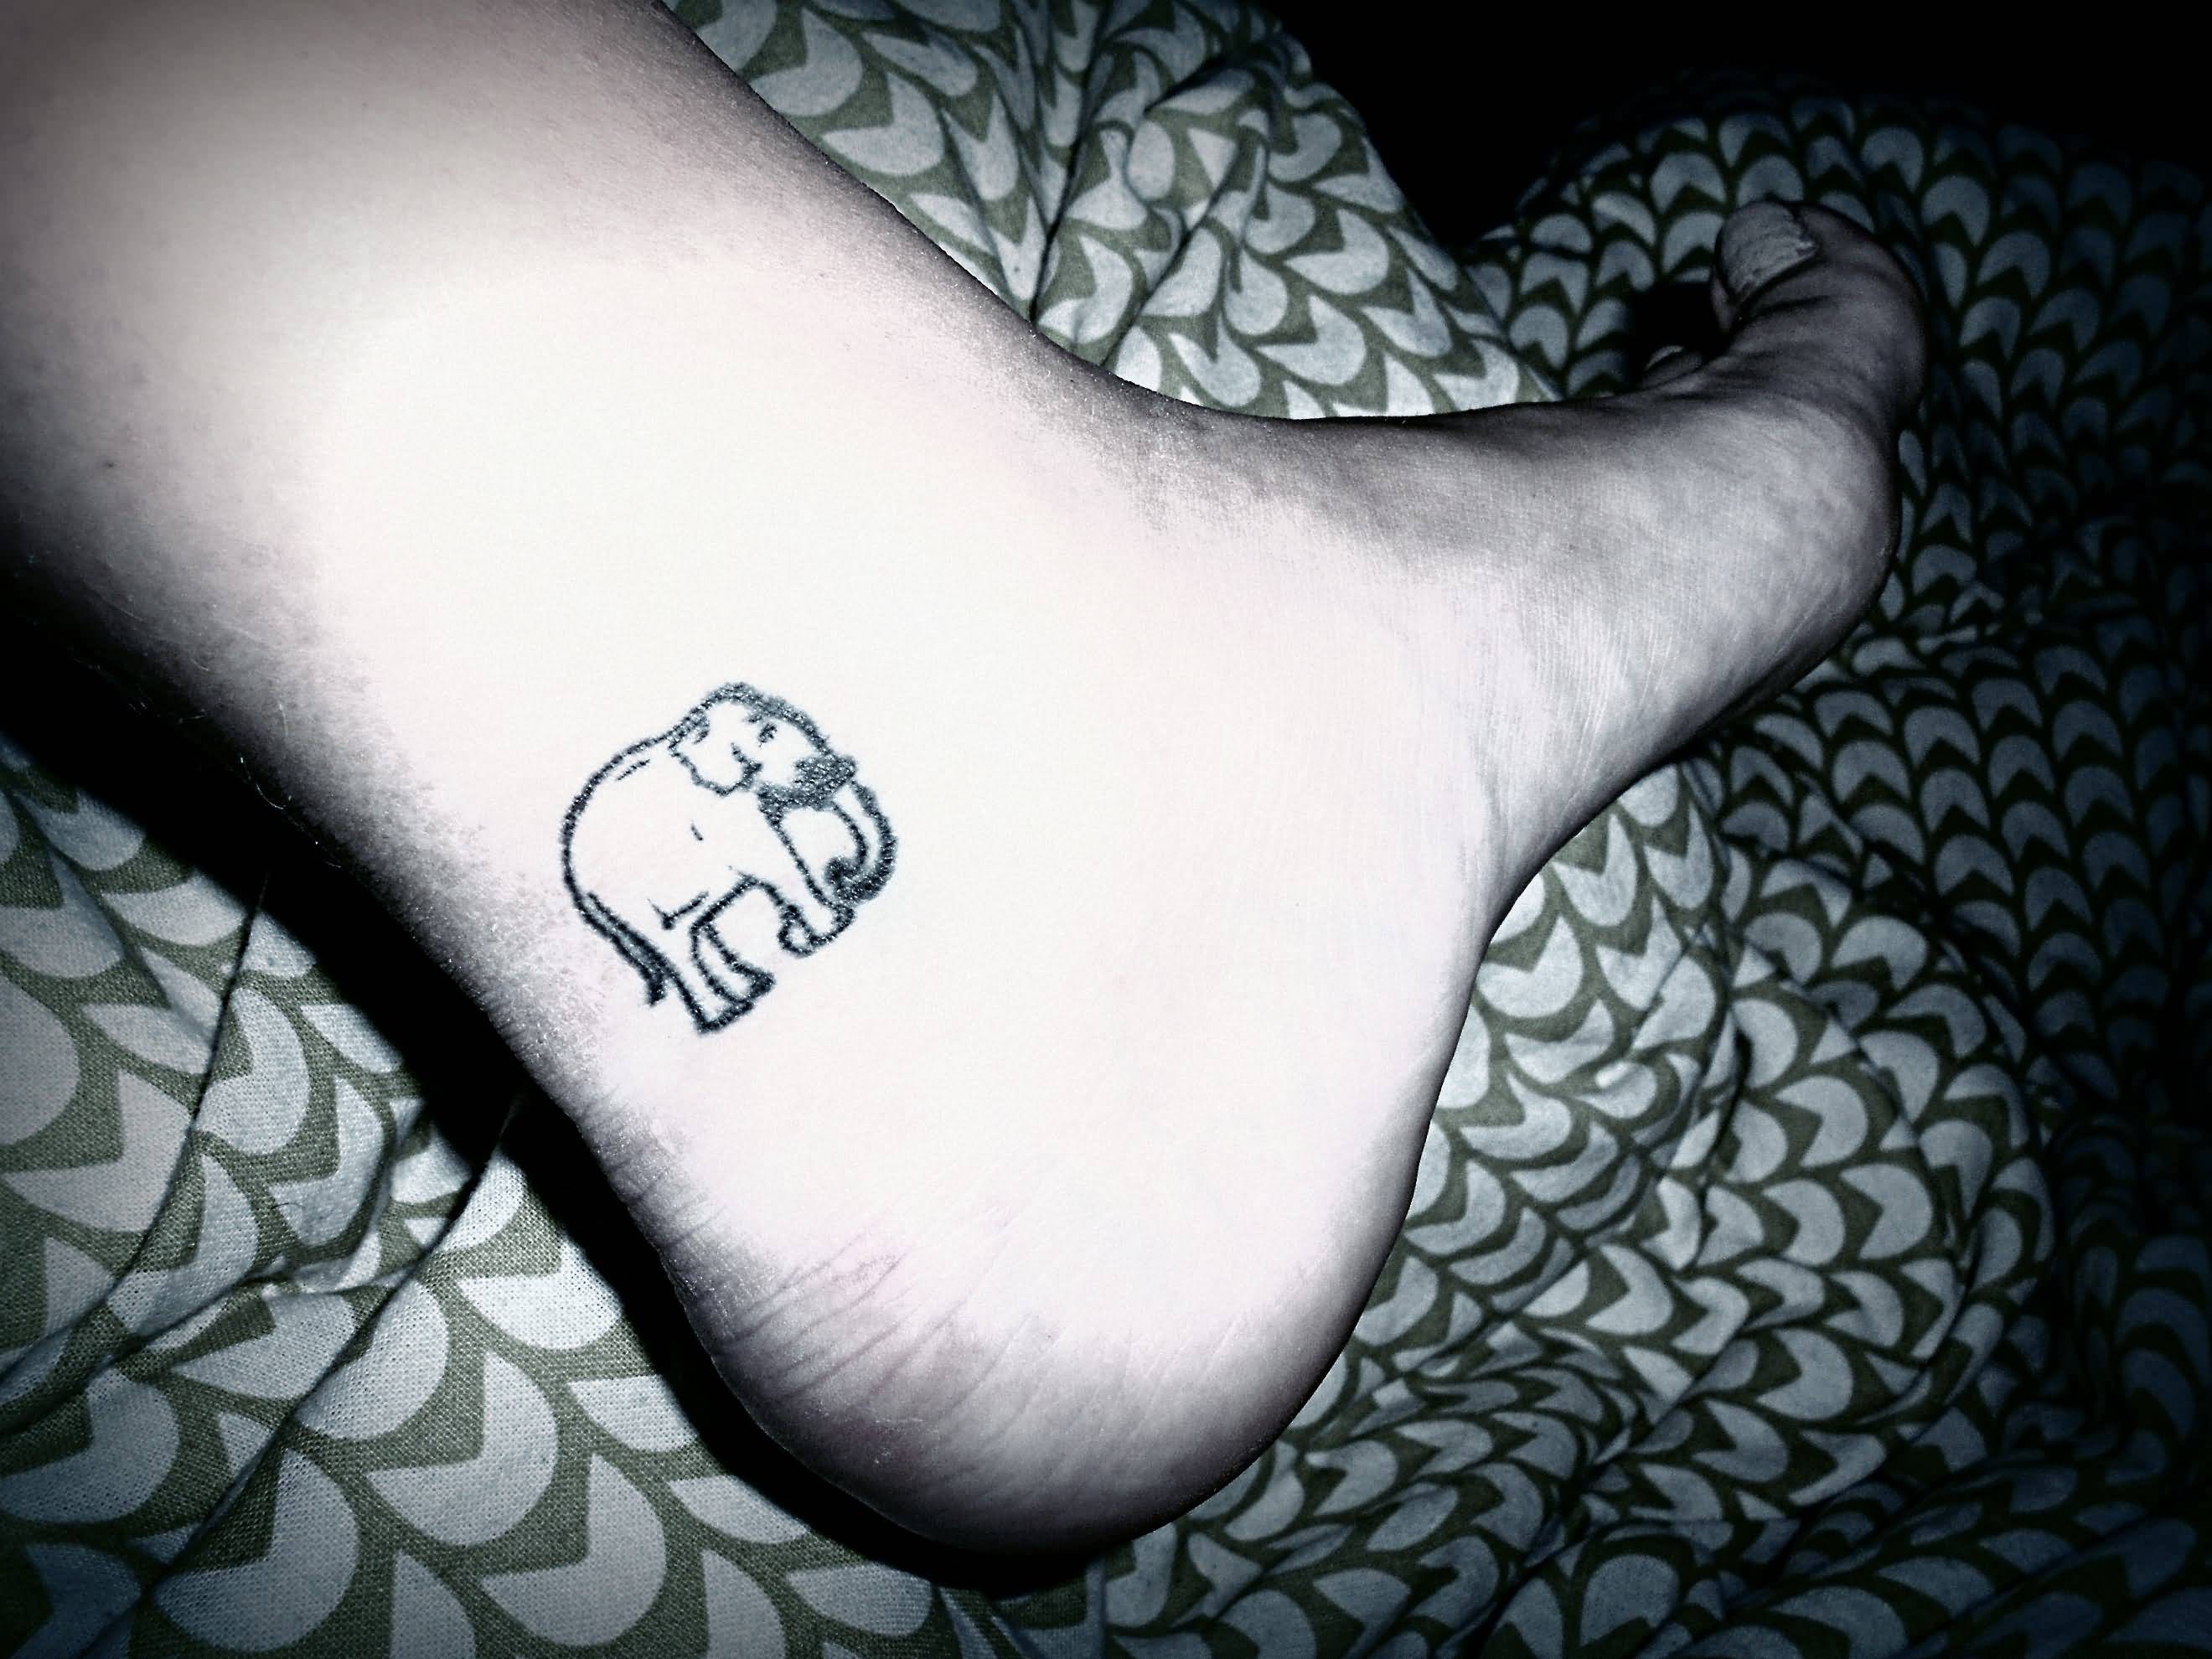 Classic Black Outline Elephant Tattoo On Ankle